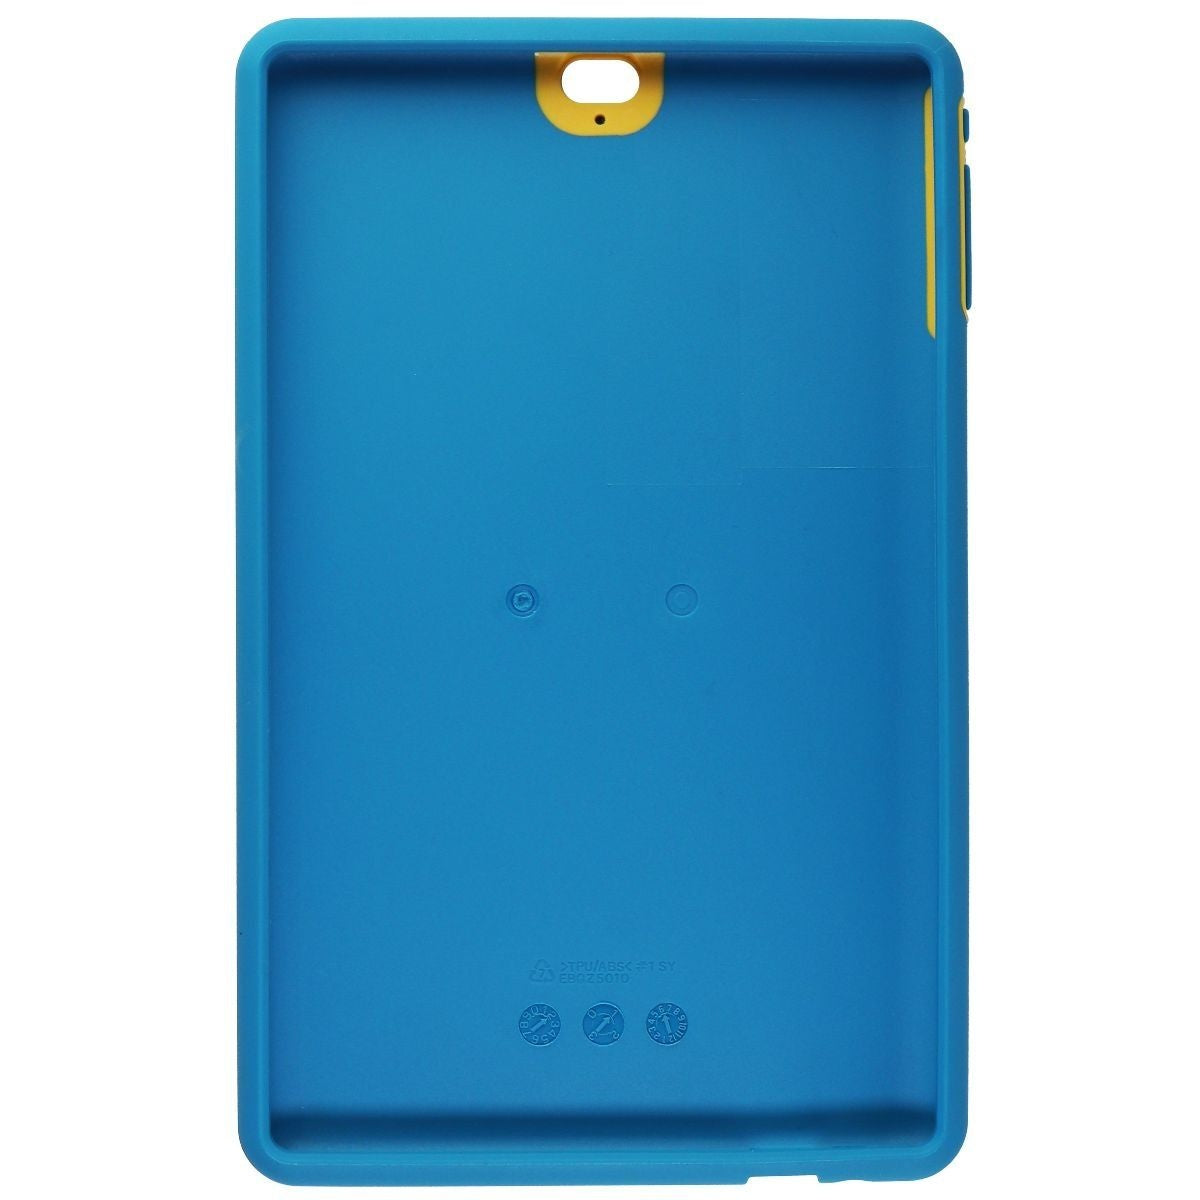 GizmoTab Protective OEM Gel Case for GizmoTab Kids Tablet - Blue/Light Orange iPad/Tablet Accessories - Cases, Covers, Keyboard Folios GizmoTab    - Simple Cell Bulk Wholesale Pricing - USA Seller